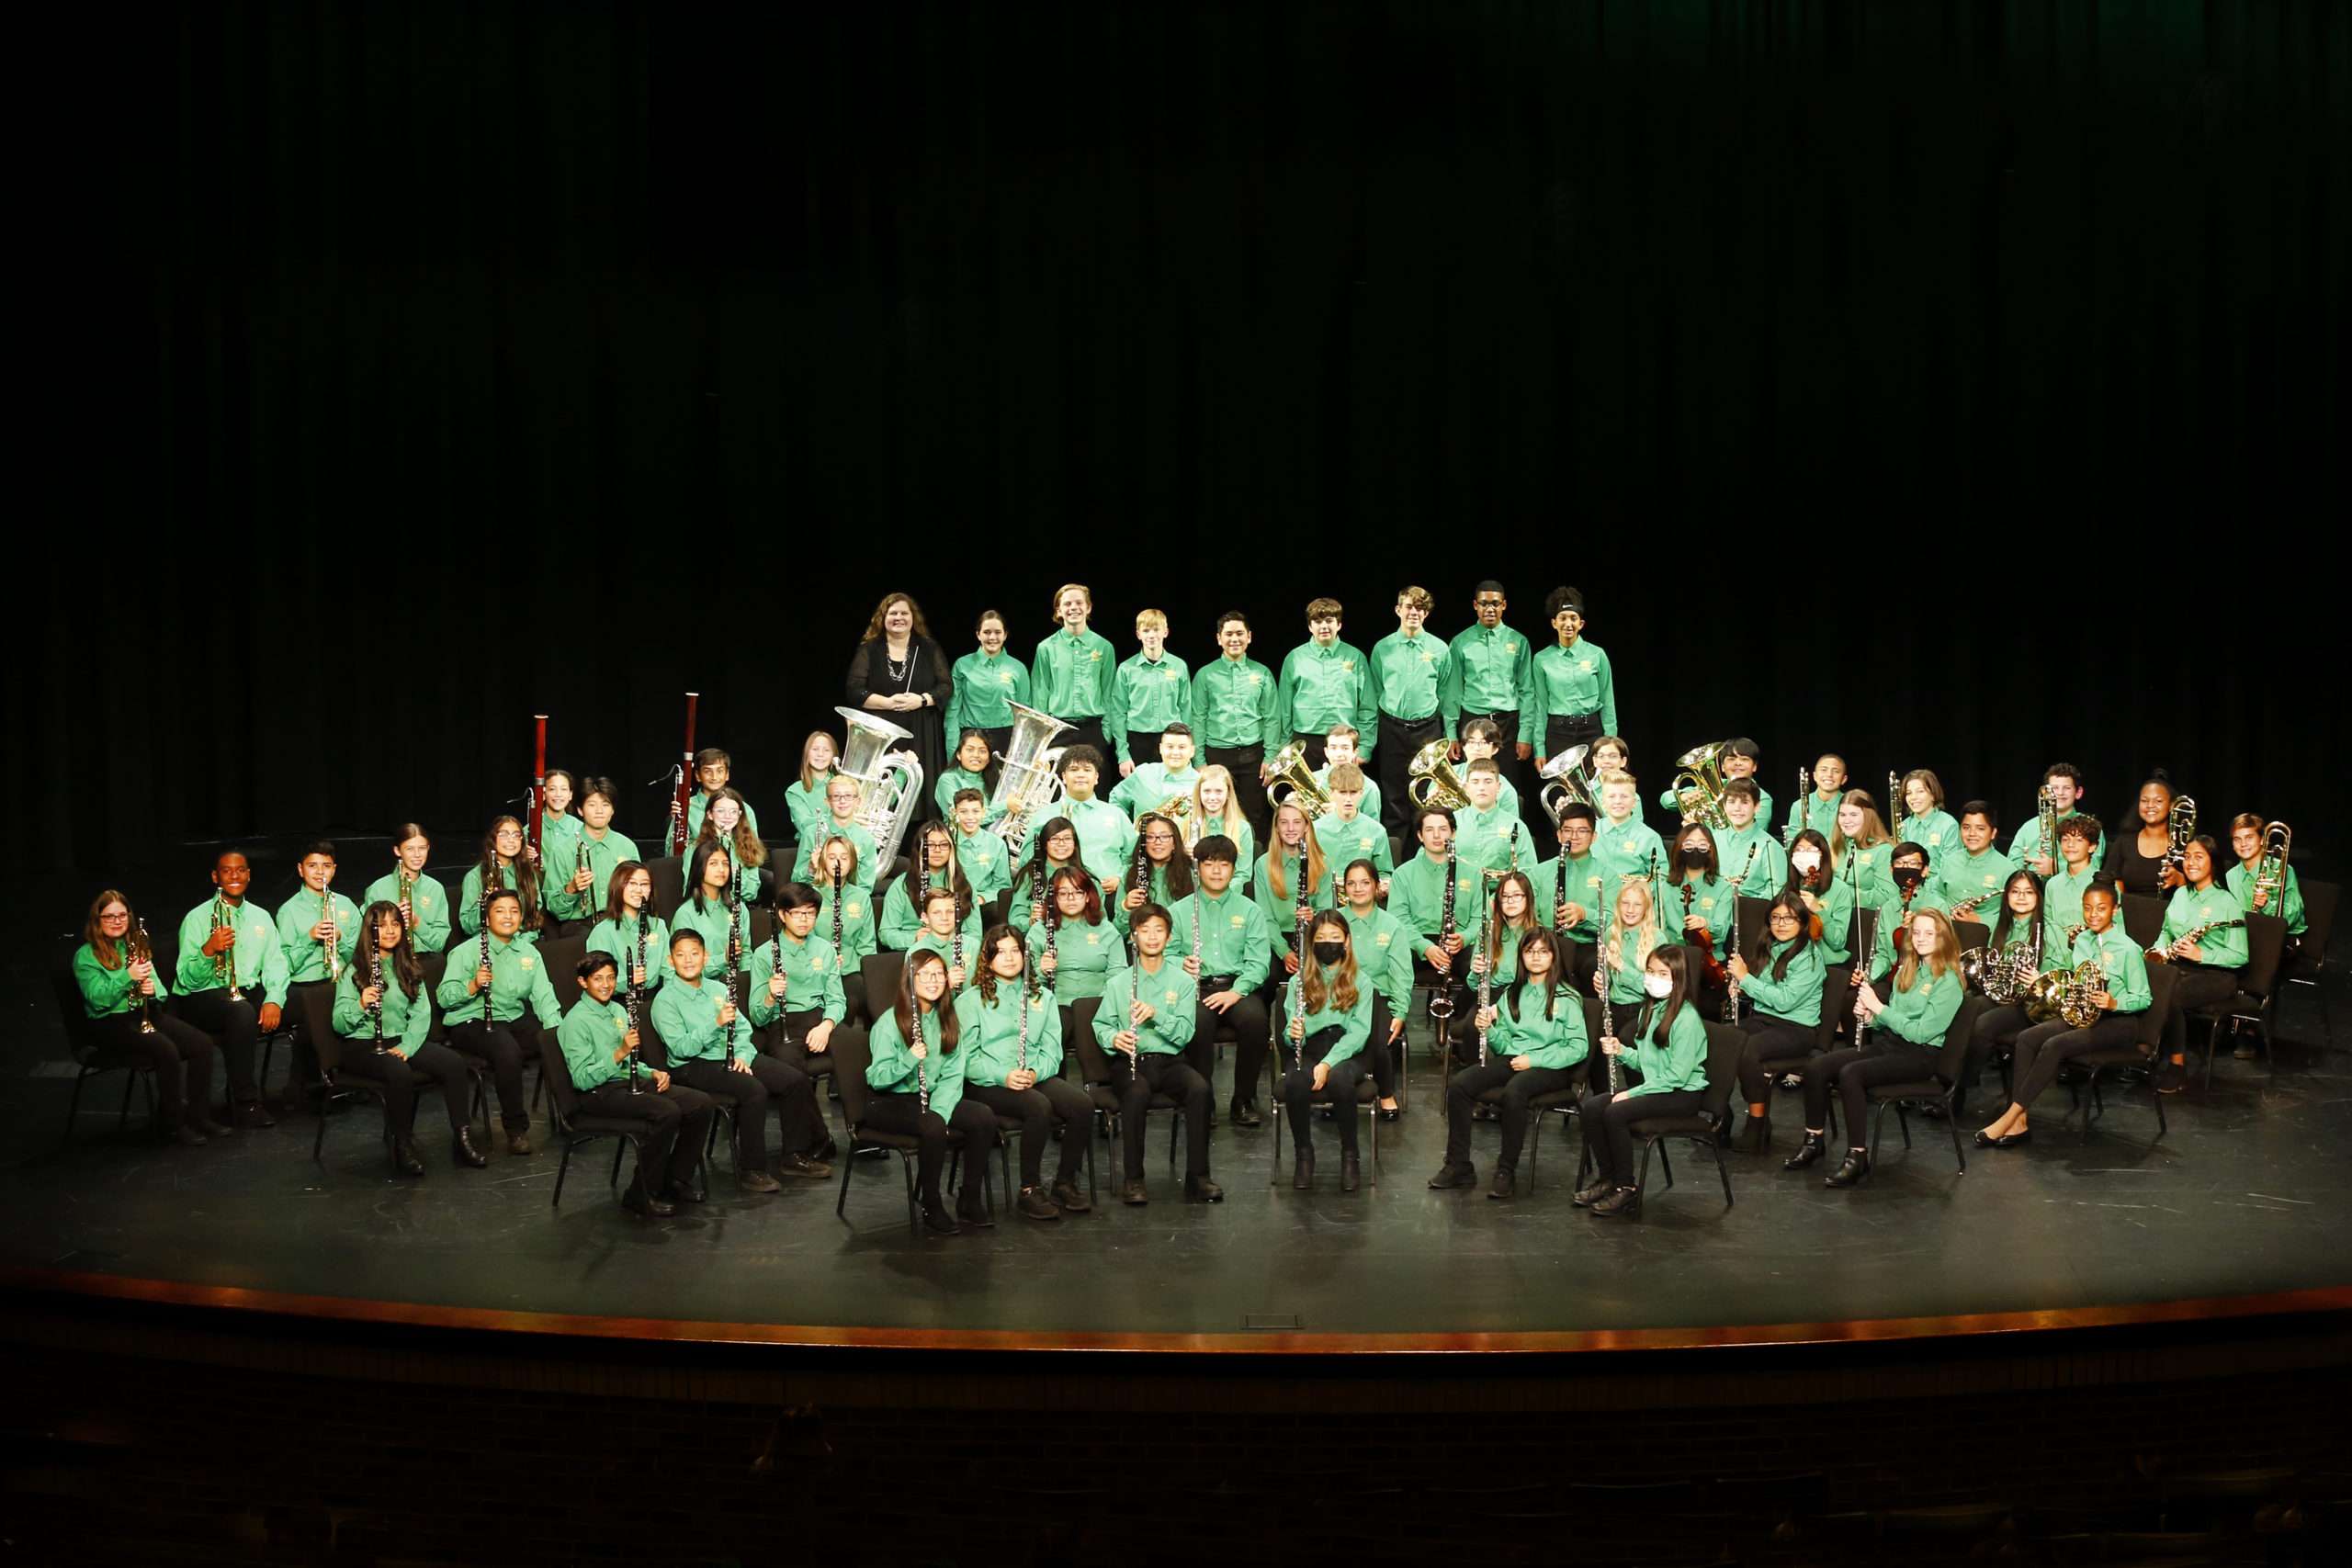 The BMS Symphonic Band poses for their official MidFest program photo